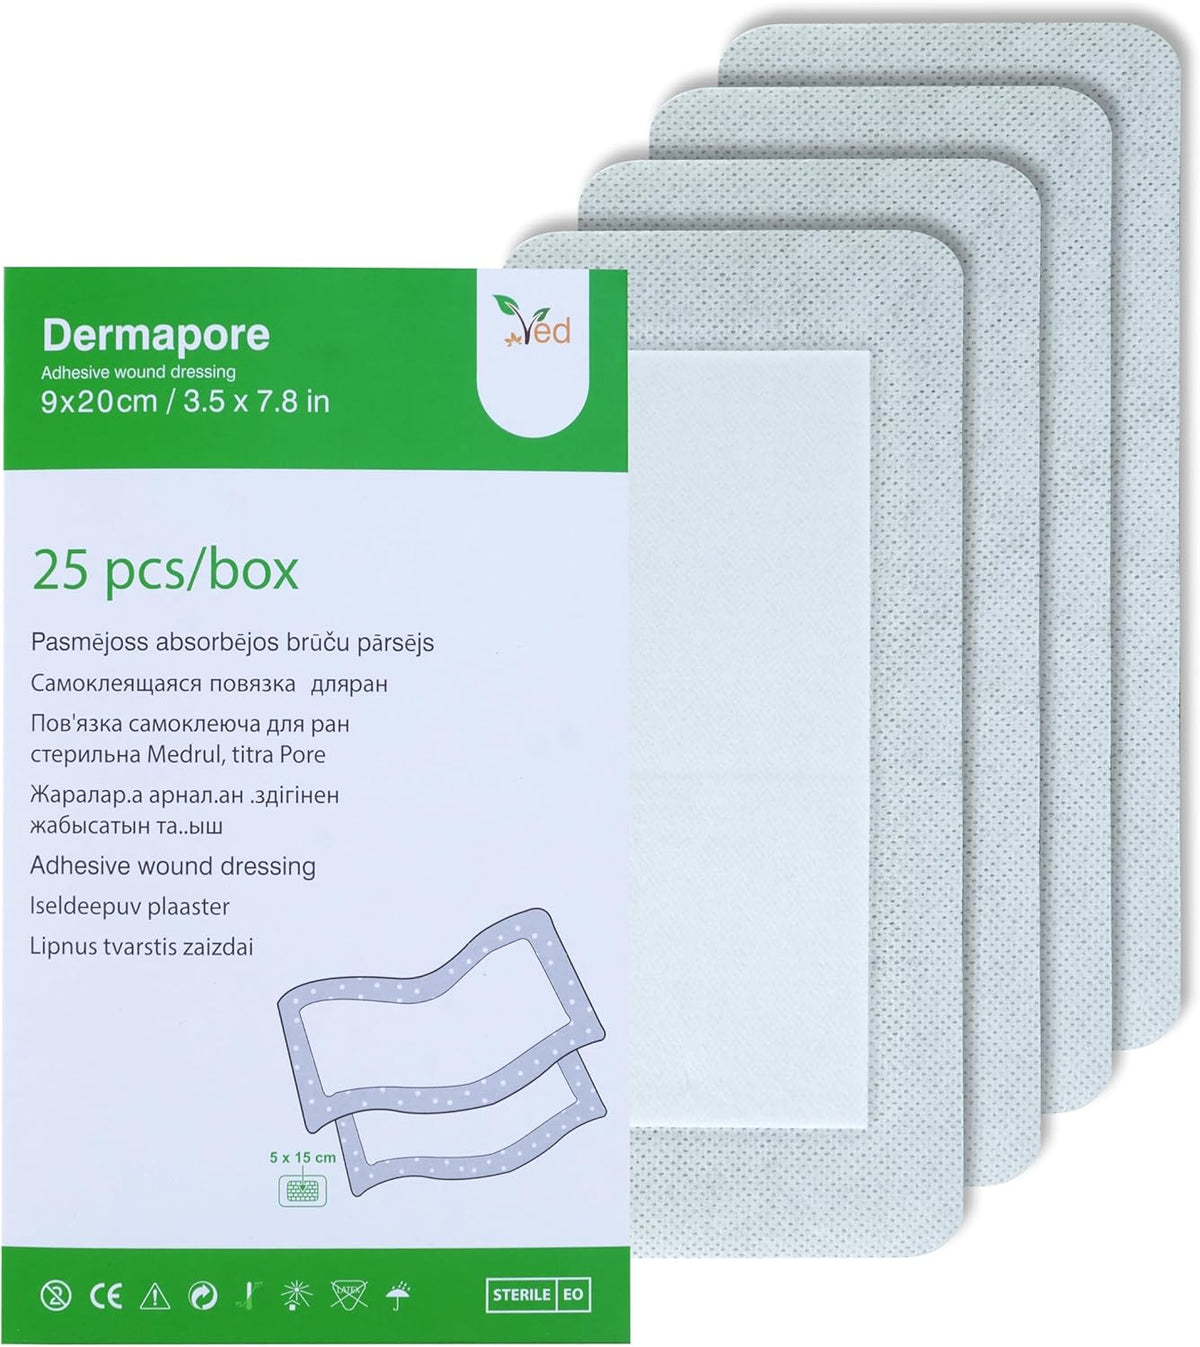 VED Dermapore Adhesive Wound Dressing- Suitable for cuts and grazes, Diabetic Leg ulcers, venous Leg ulcers, Small Pressure sores- Medium, 9 X 20cm (Pack of 25).